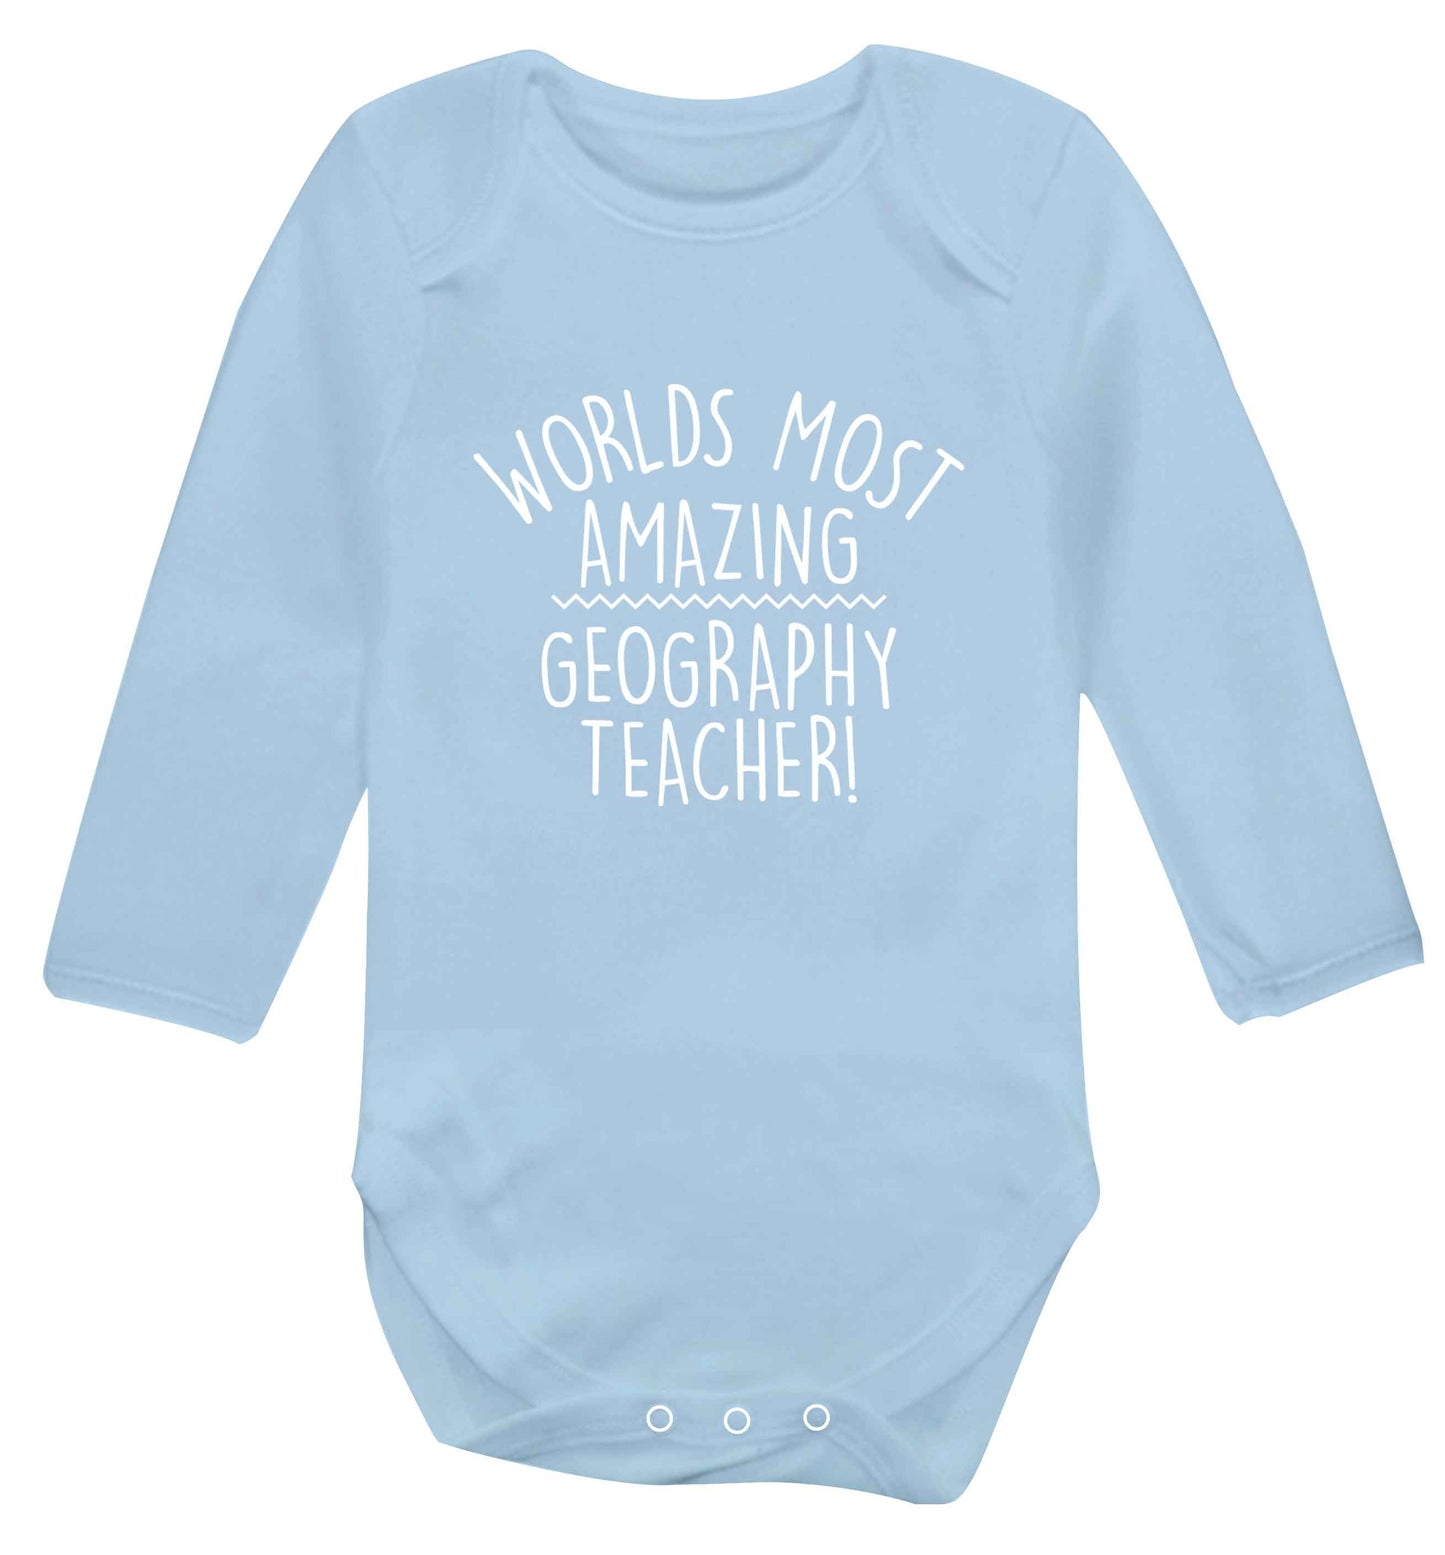 Worlds most amazing geography teacher baby vest long sleeved pale blue 6-12 months